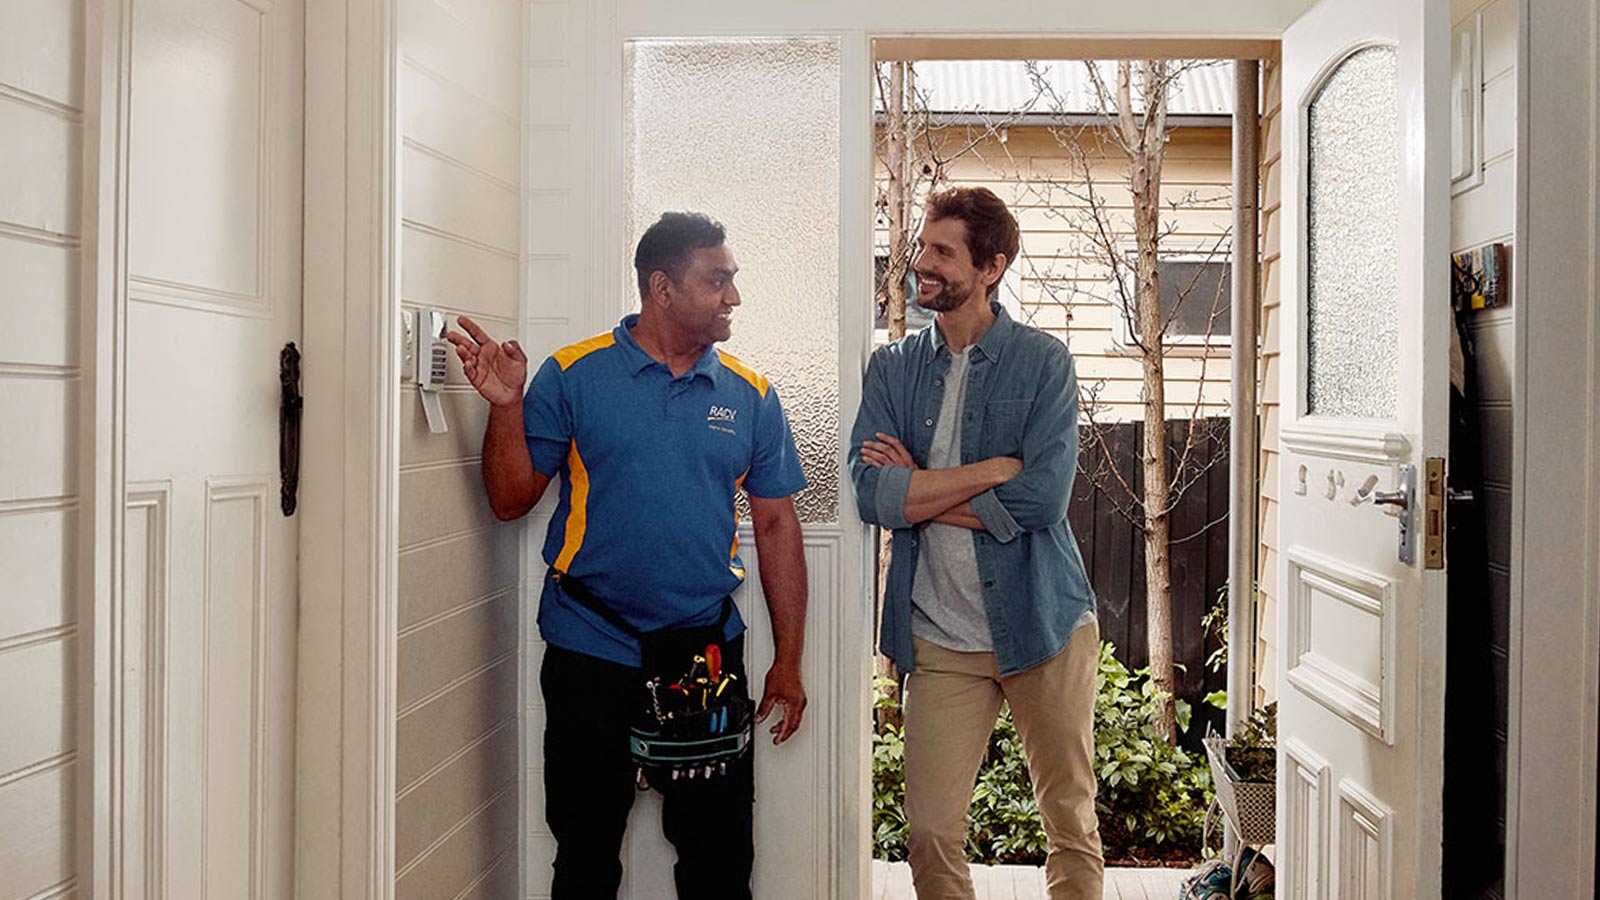 RACV Tradesman chatting to a member inside their house, whilst pointing at an alarm system.